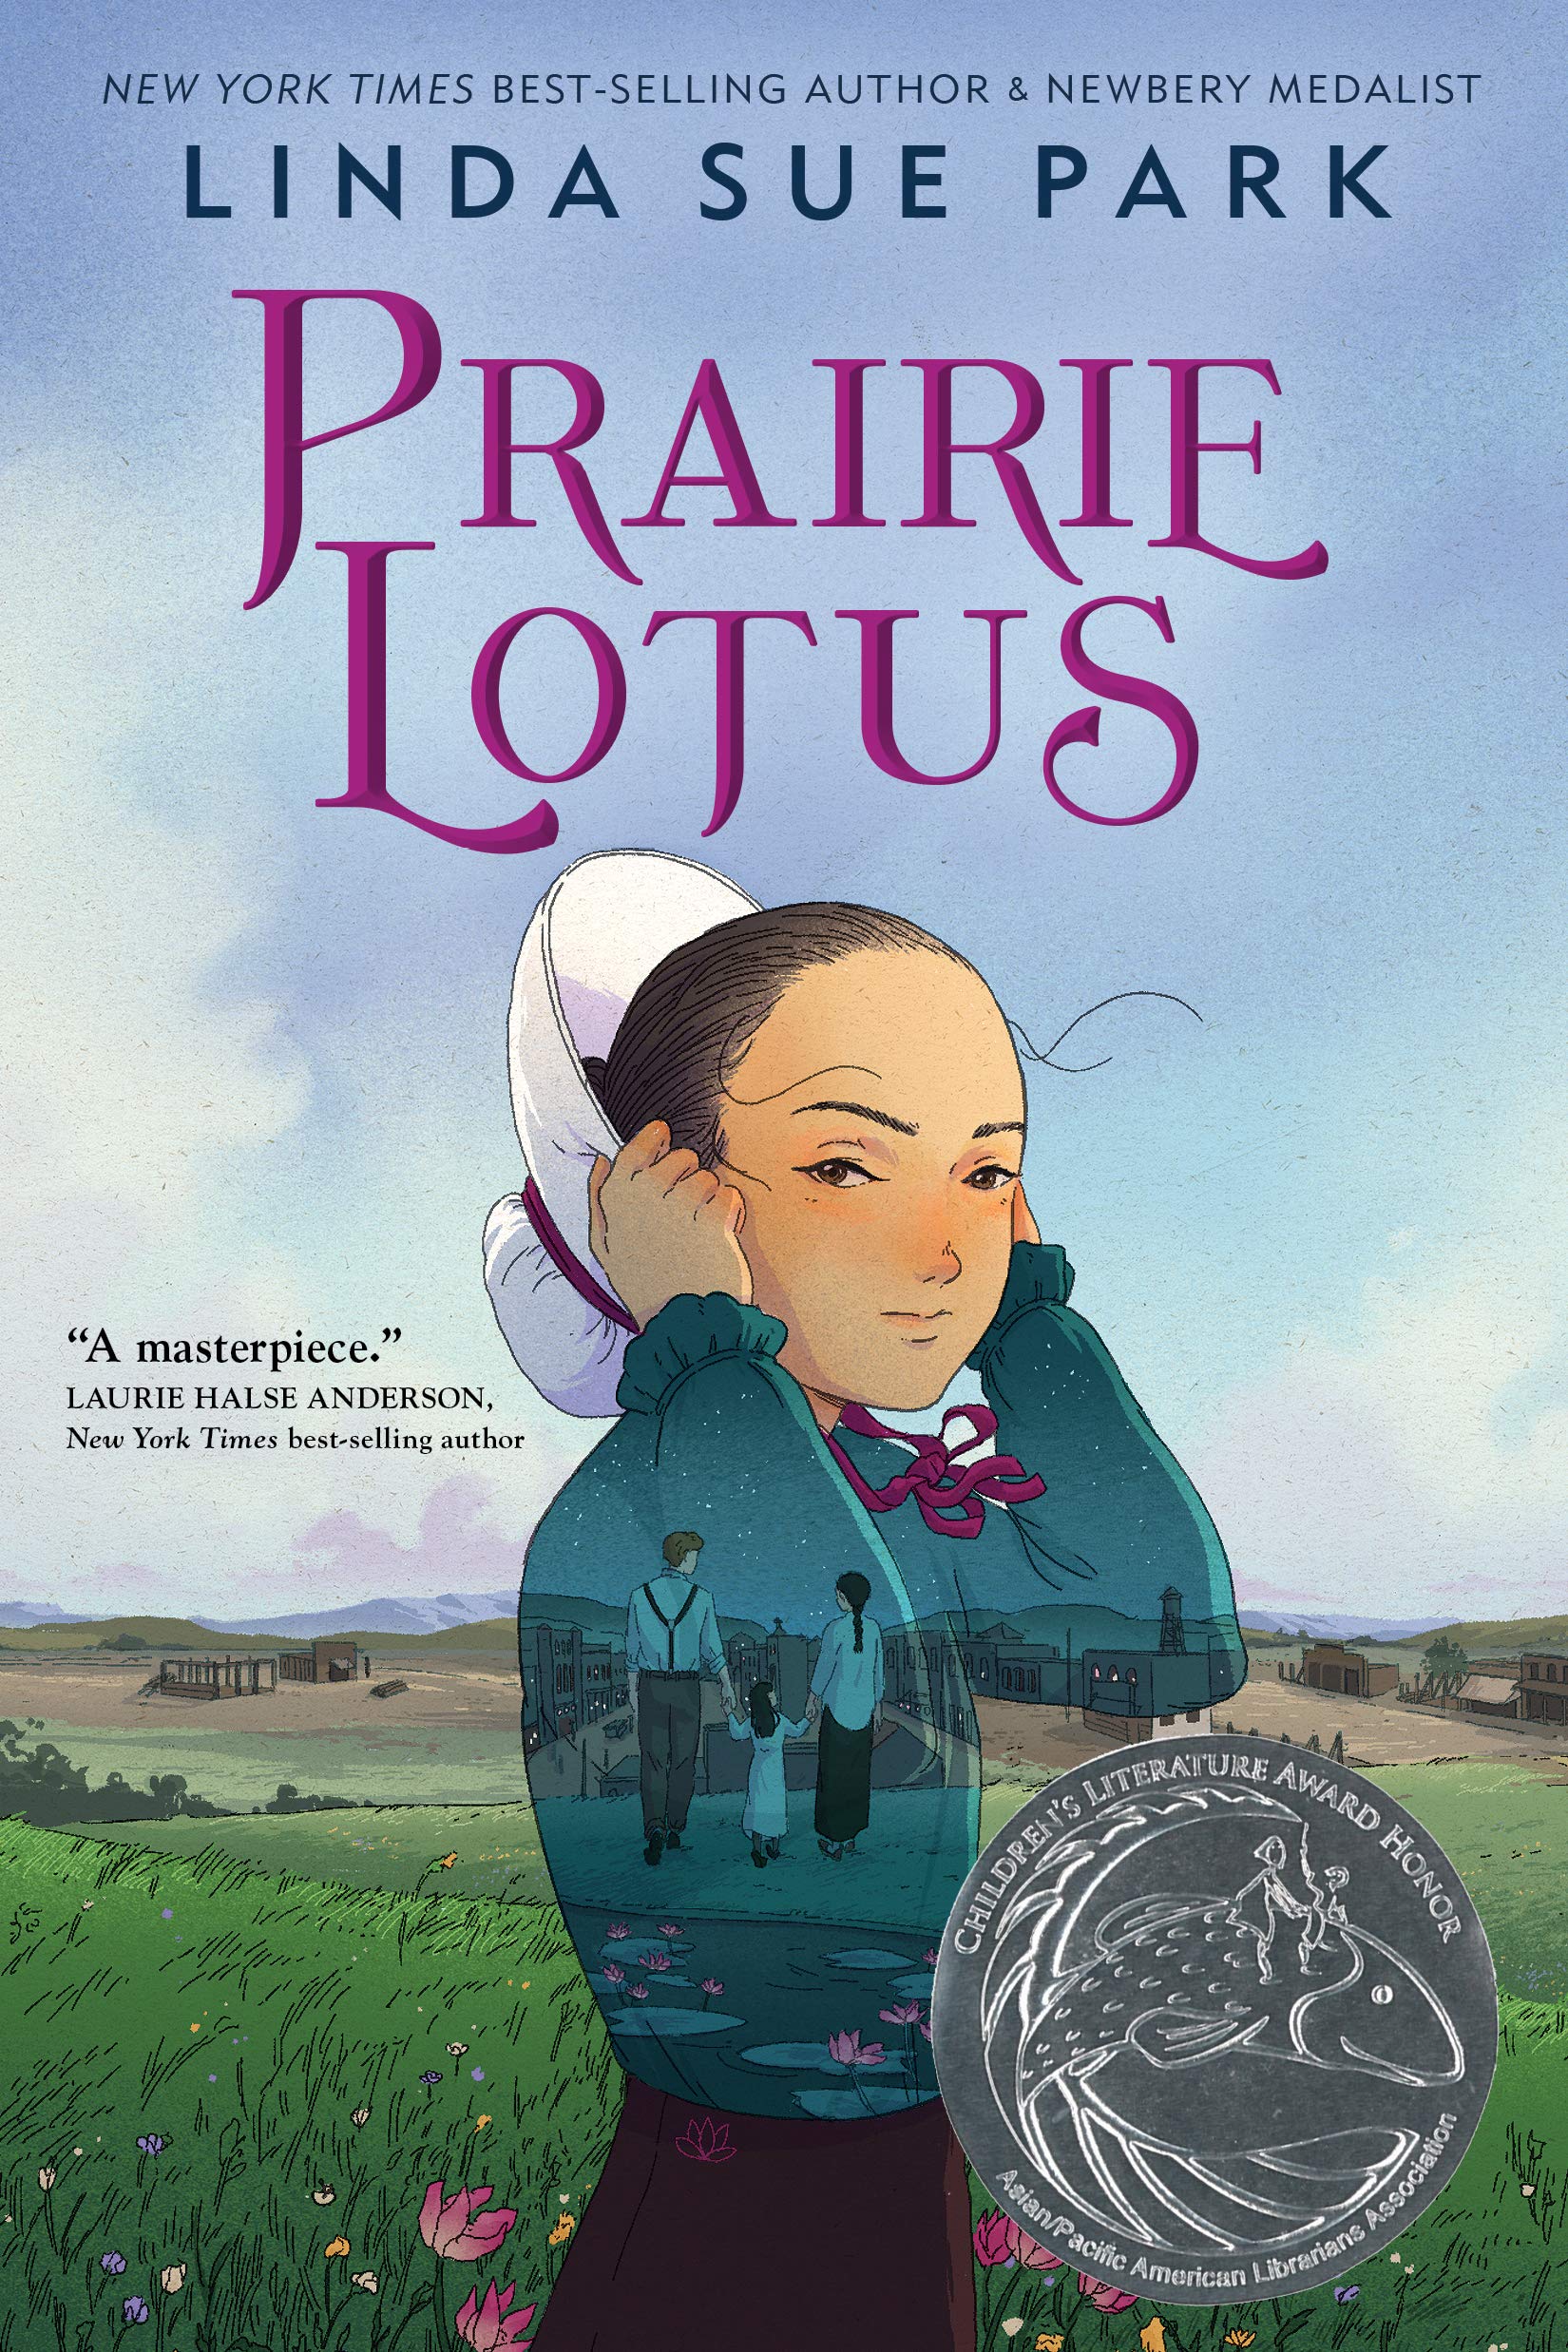 Exciting month of activities planned as FdL Reads ‘Prairie Lotus’